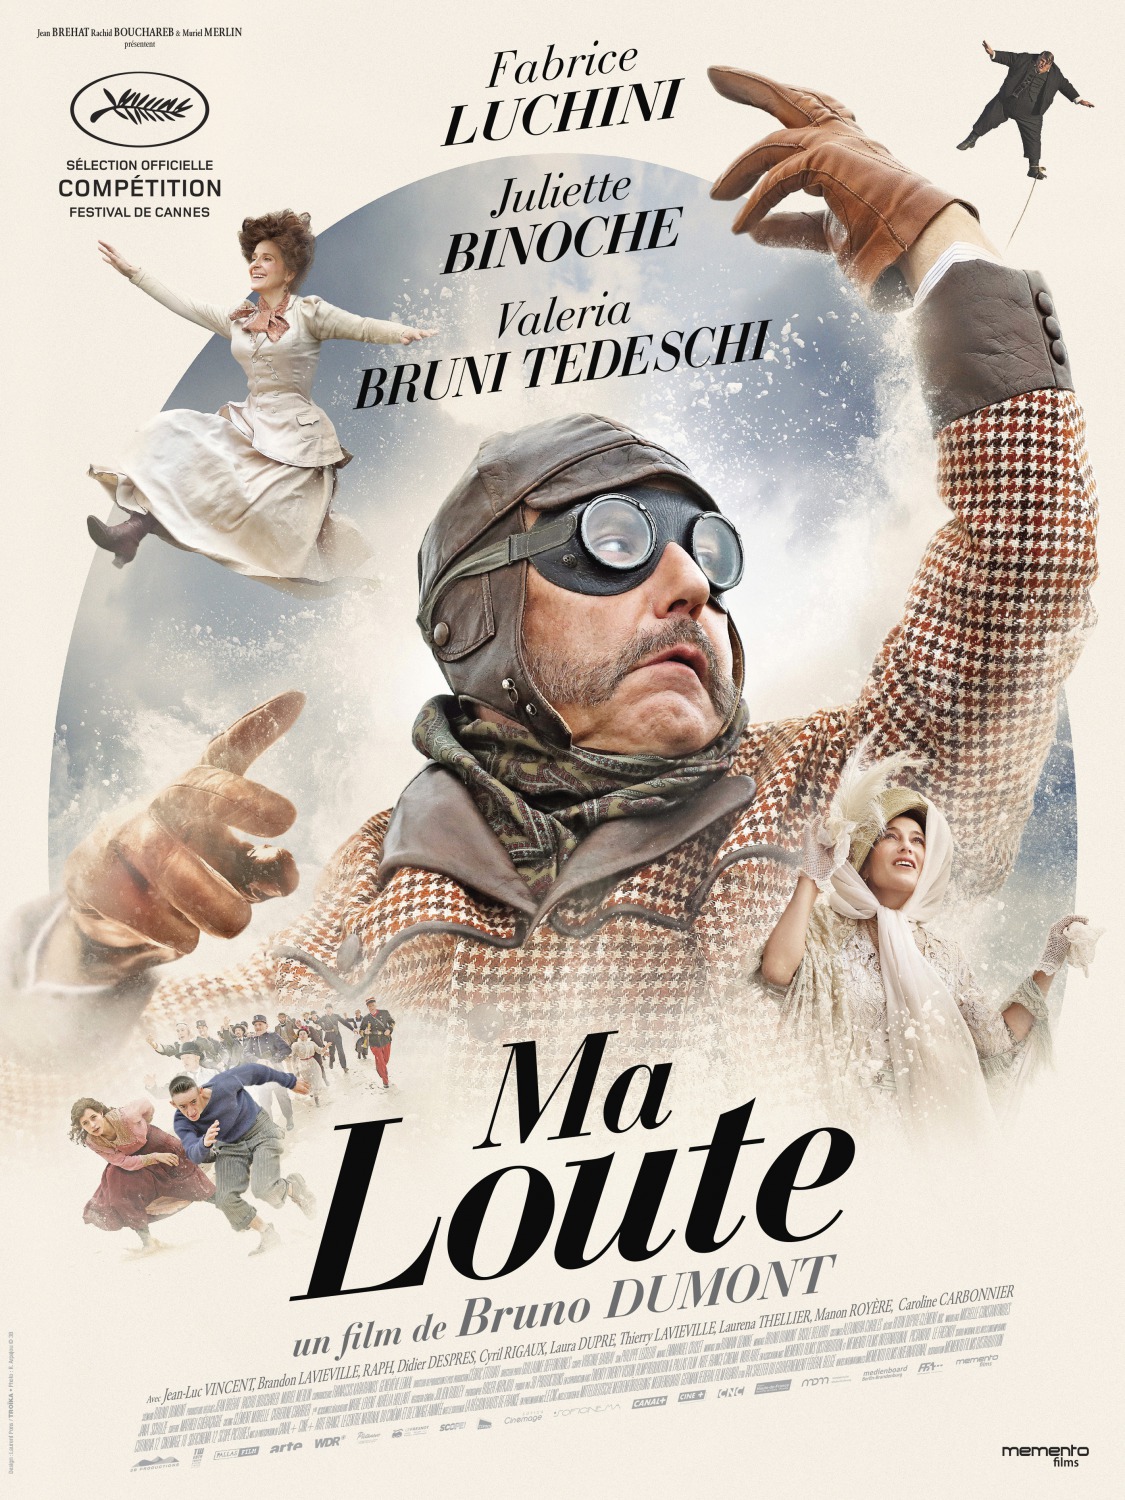 Extra Large Movie Poster Image for Ma loute 